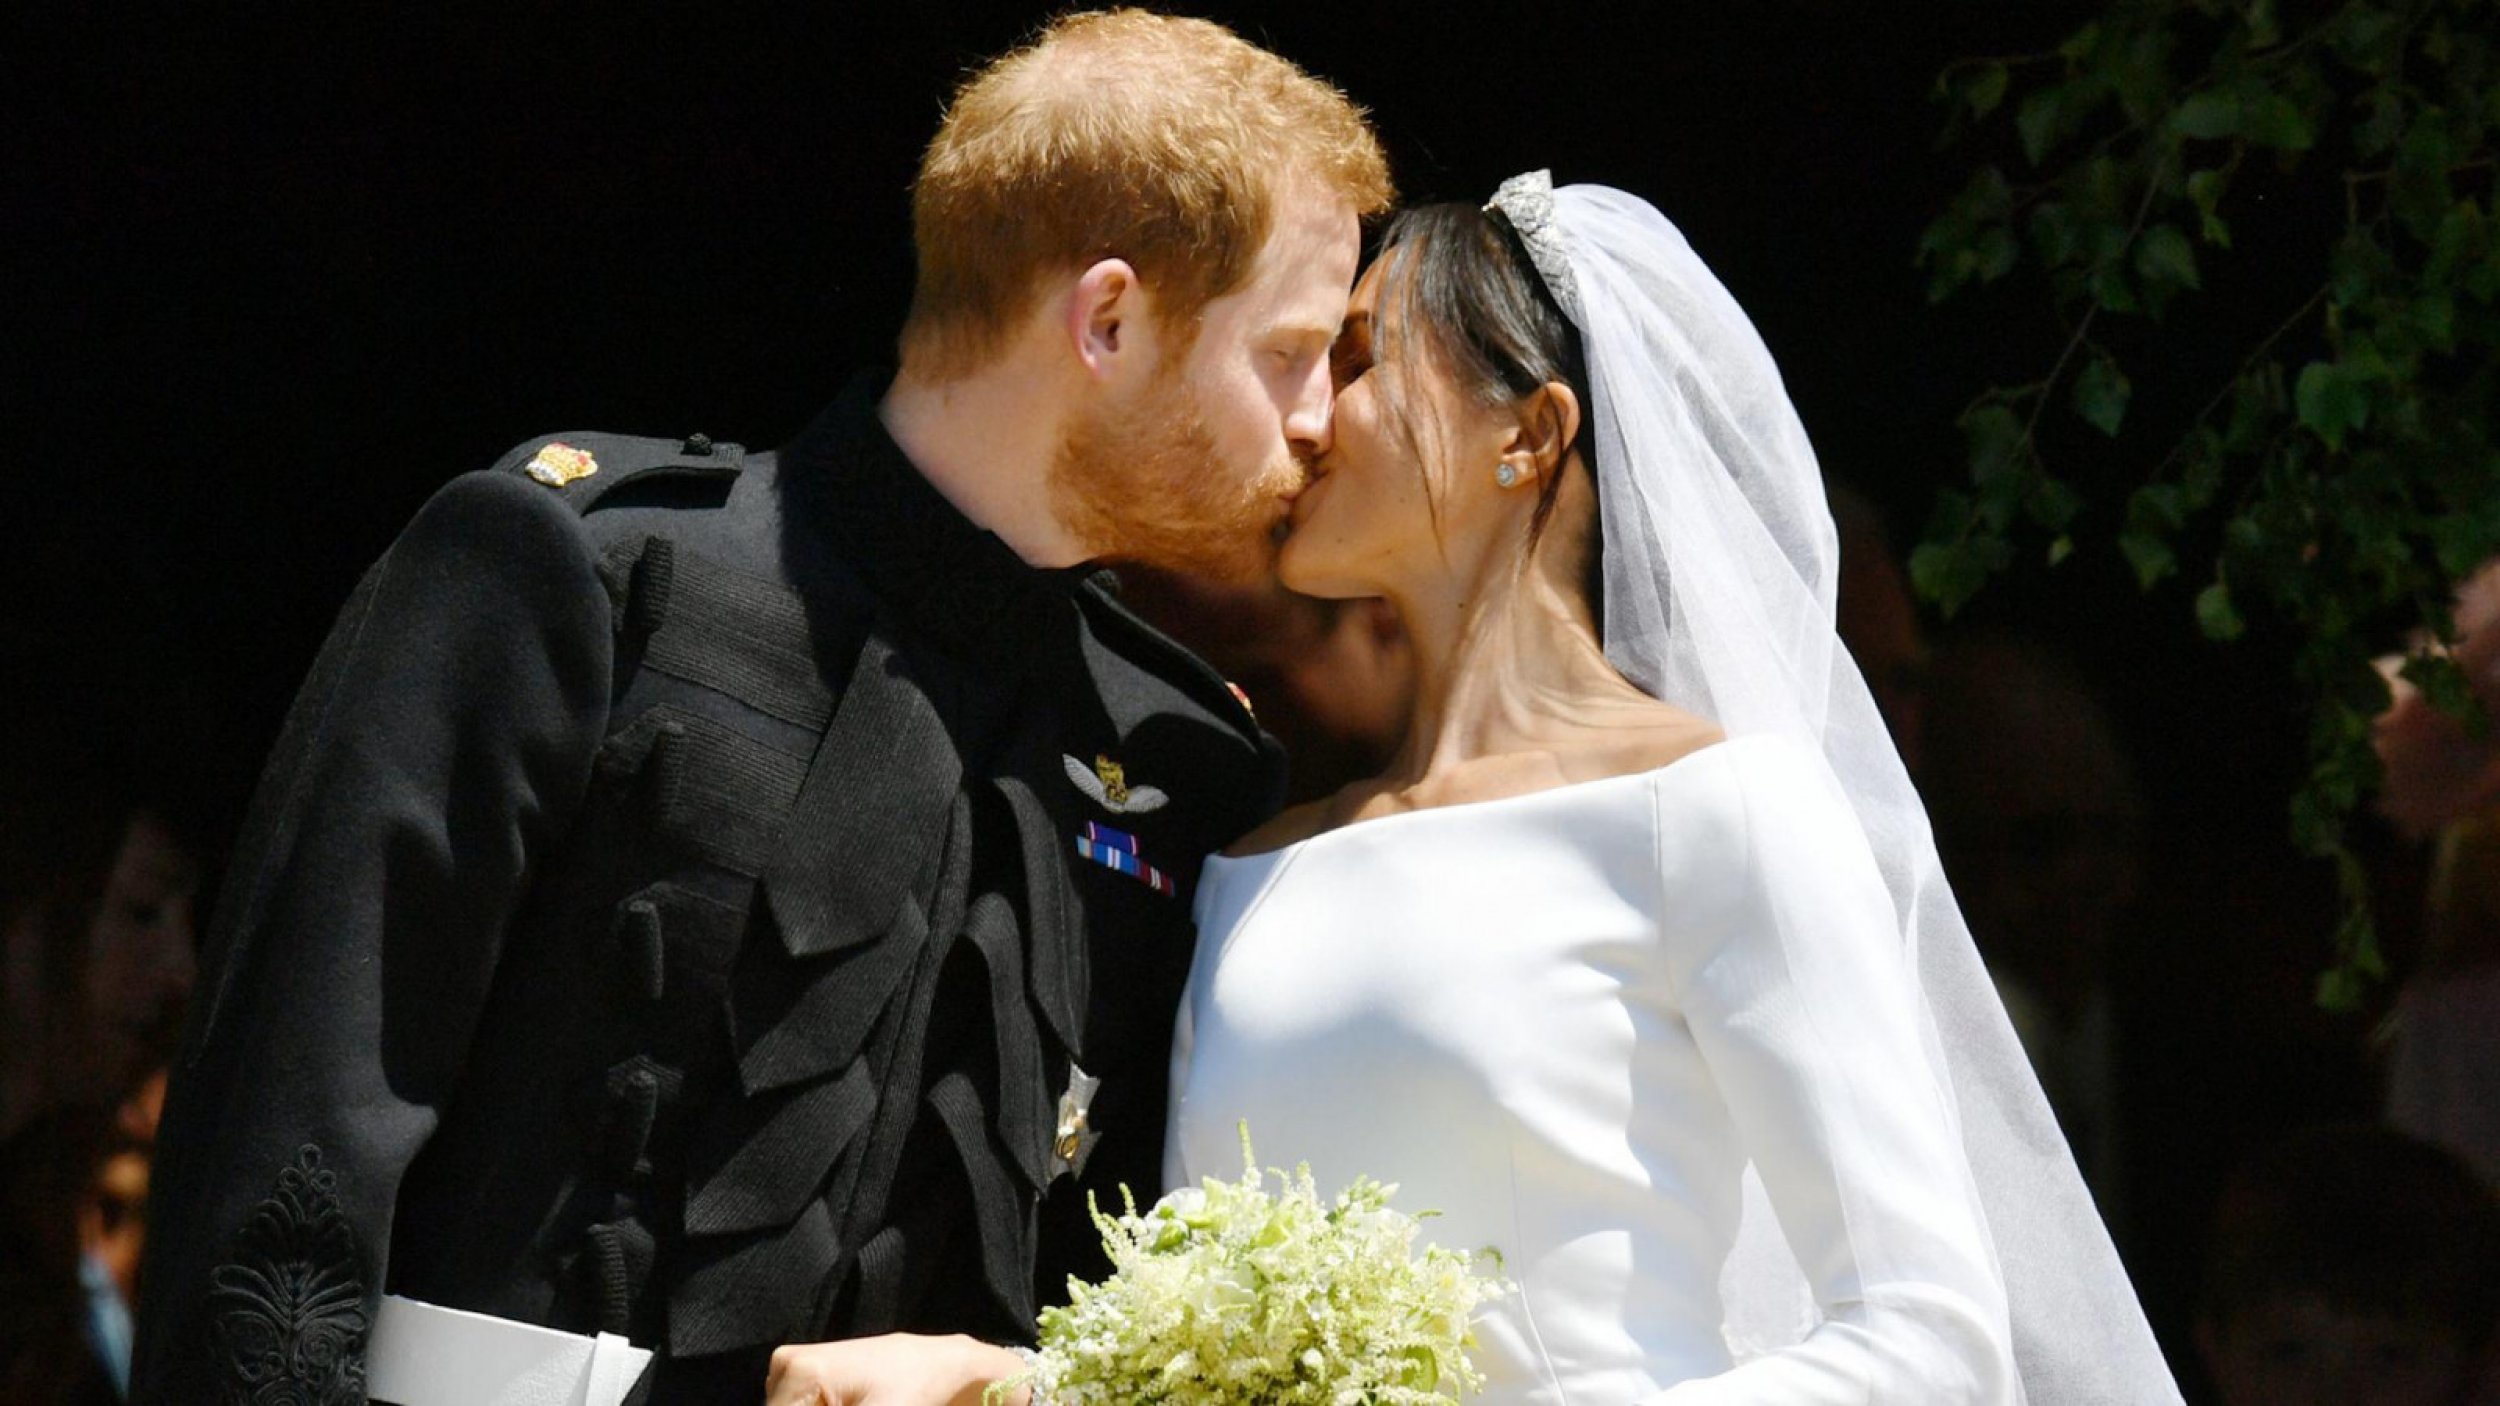 Watch Prince Harry And Meghans First Kiss As Husband And Wife At Royal Wedding